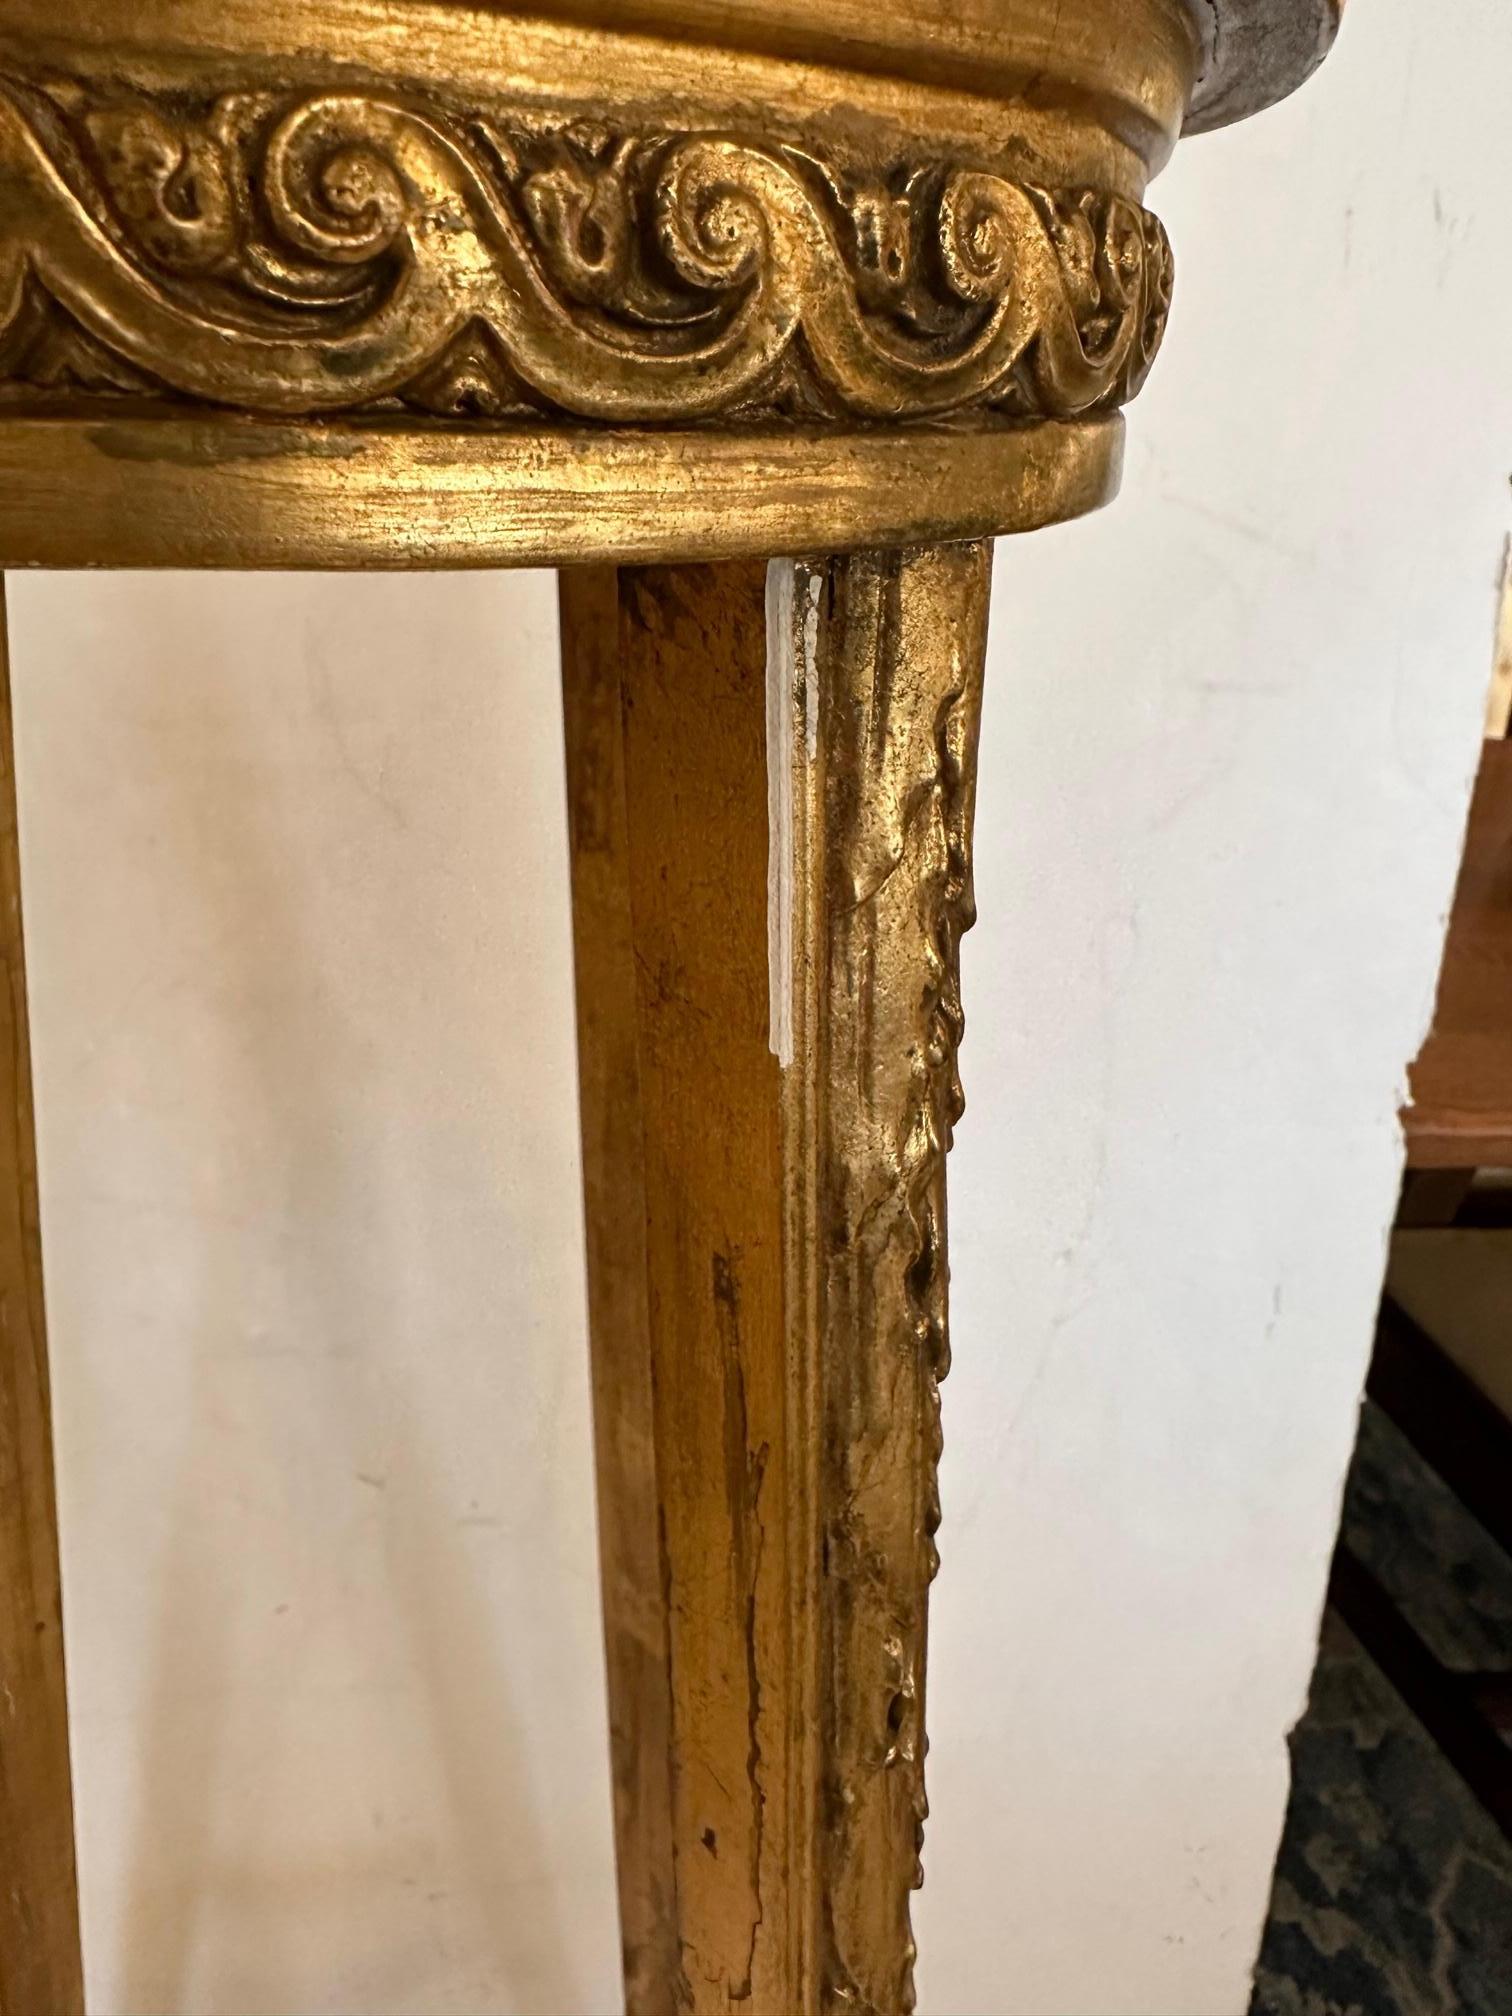 Lovely elongated tall Stand for a plant or objet d'arte having fancy giltwood and round marble inset top.